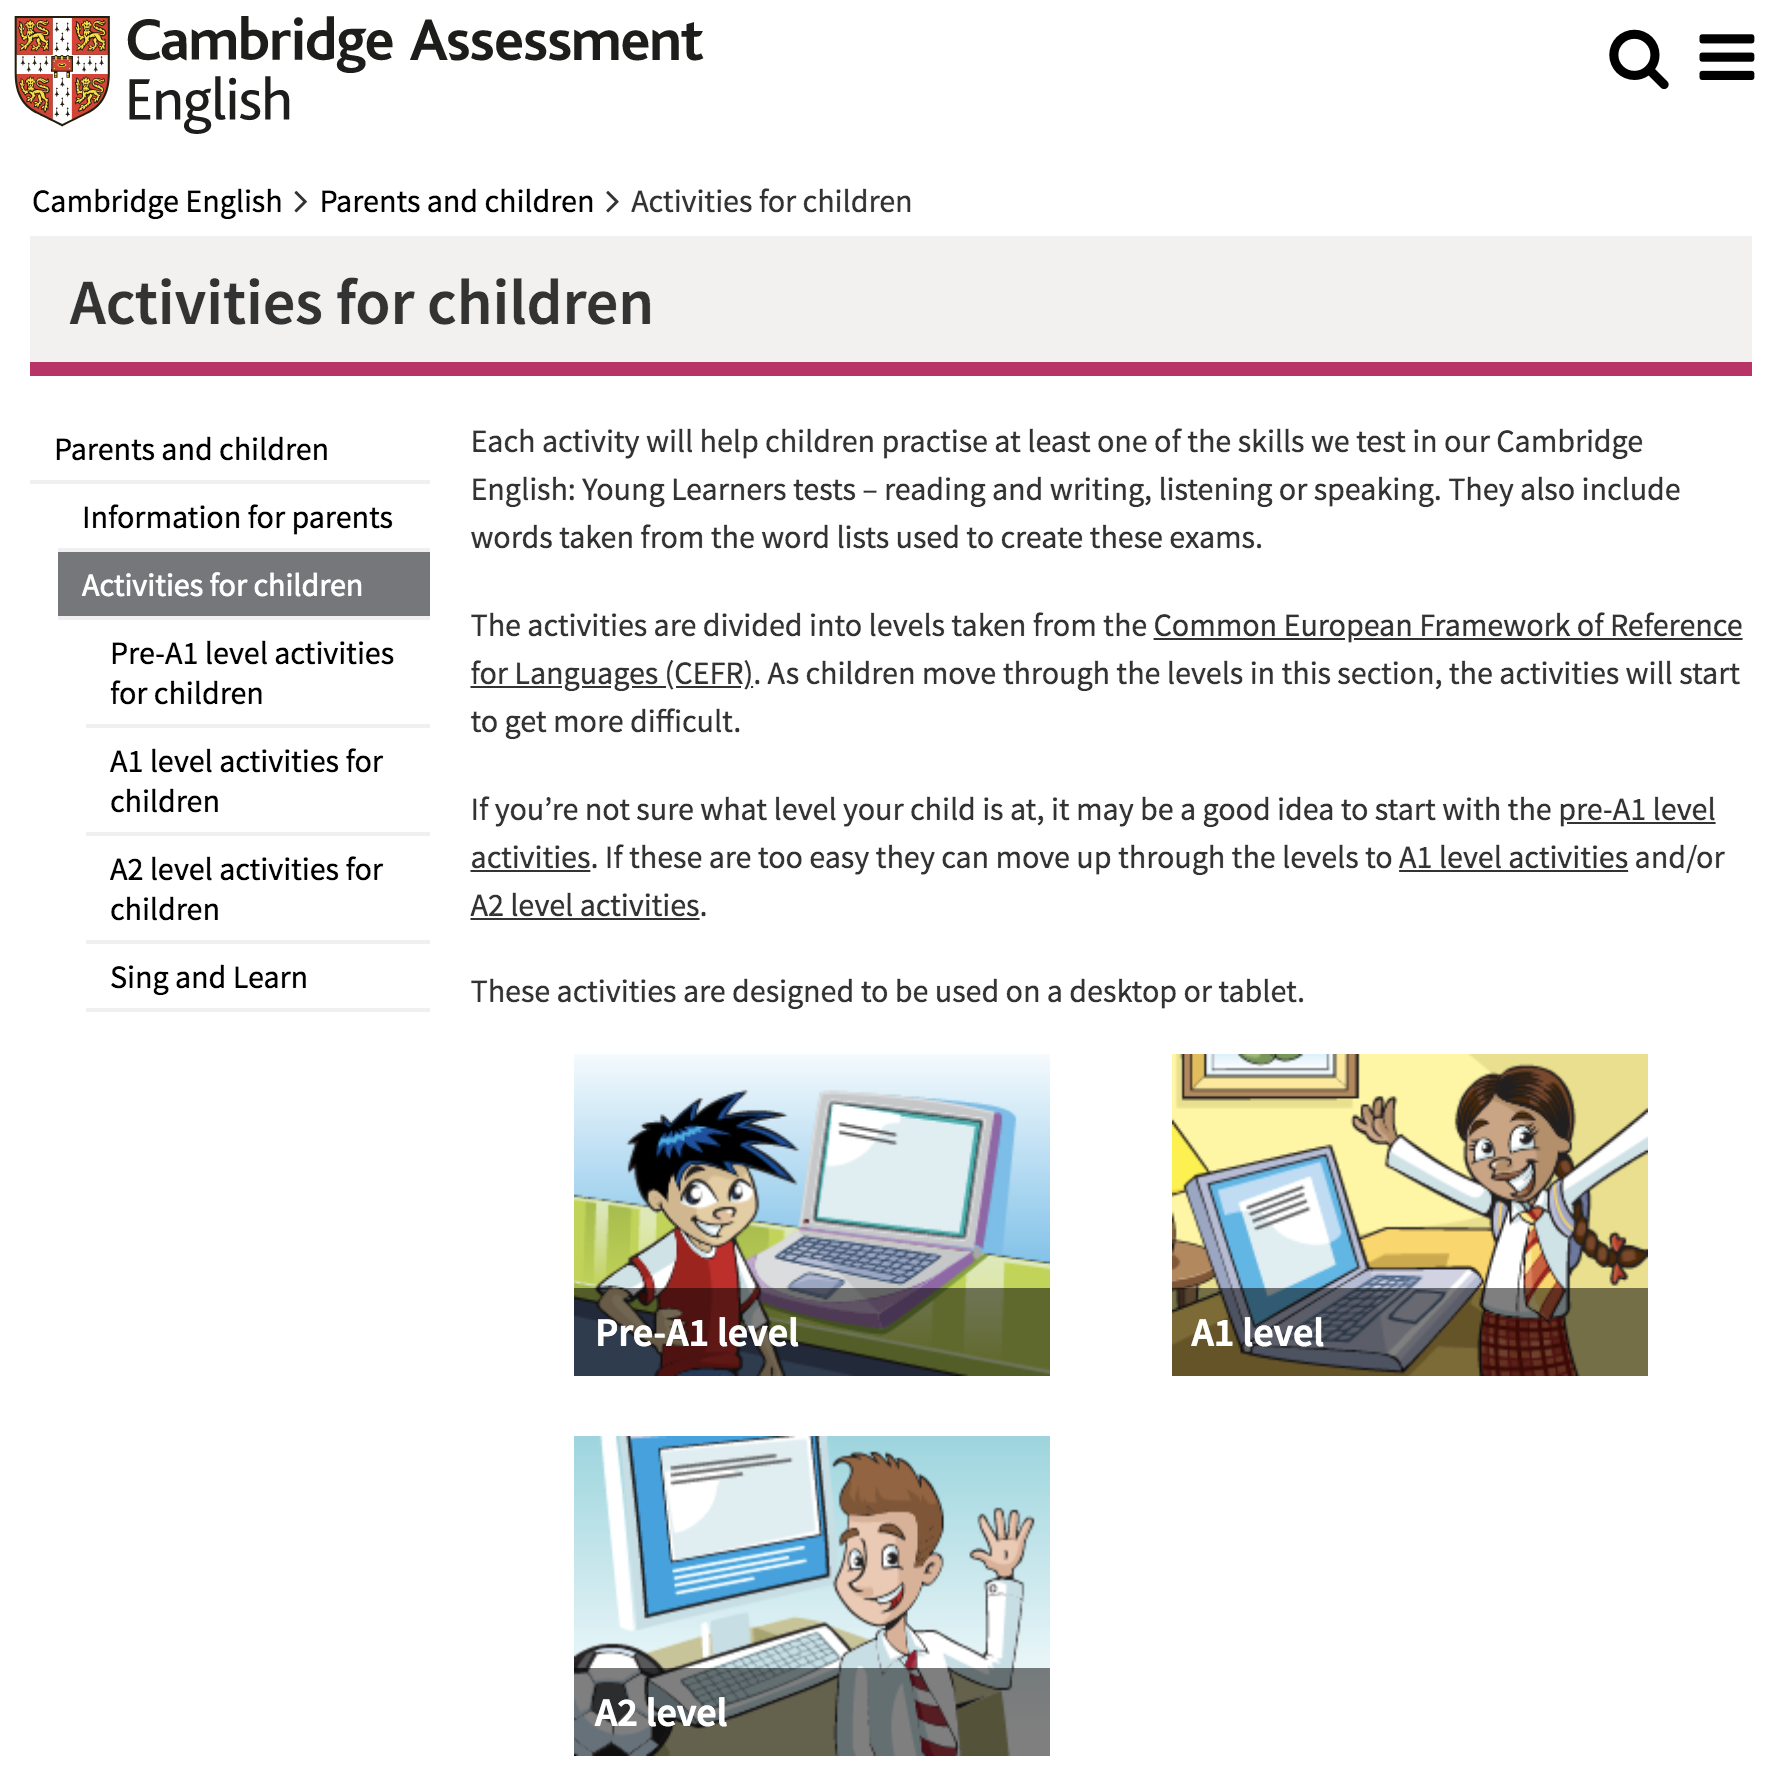 Activities for children published by Cambridge